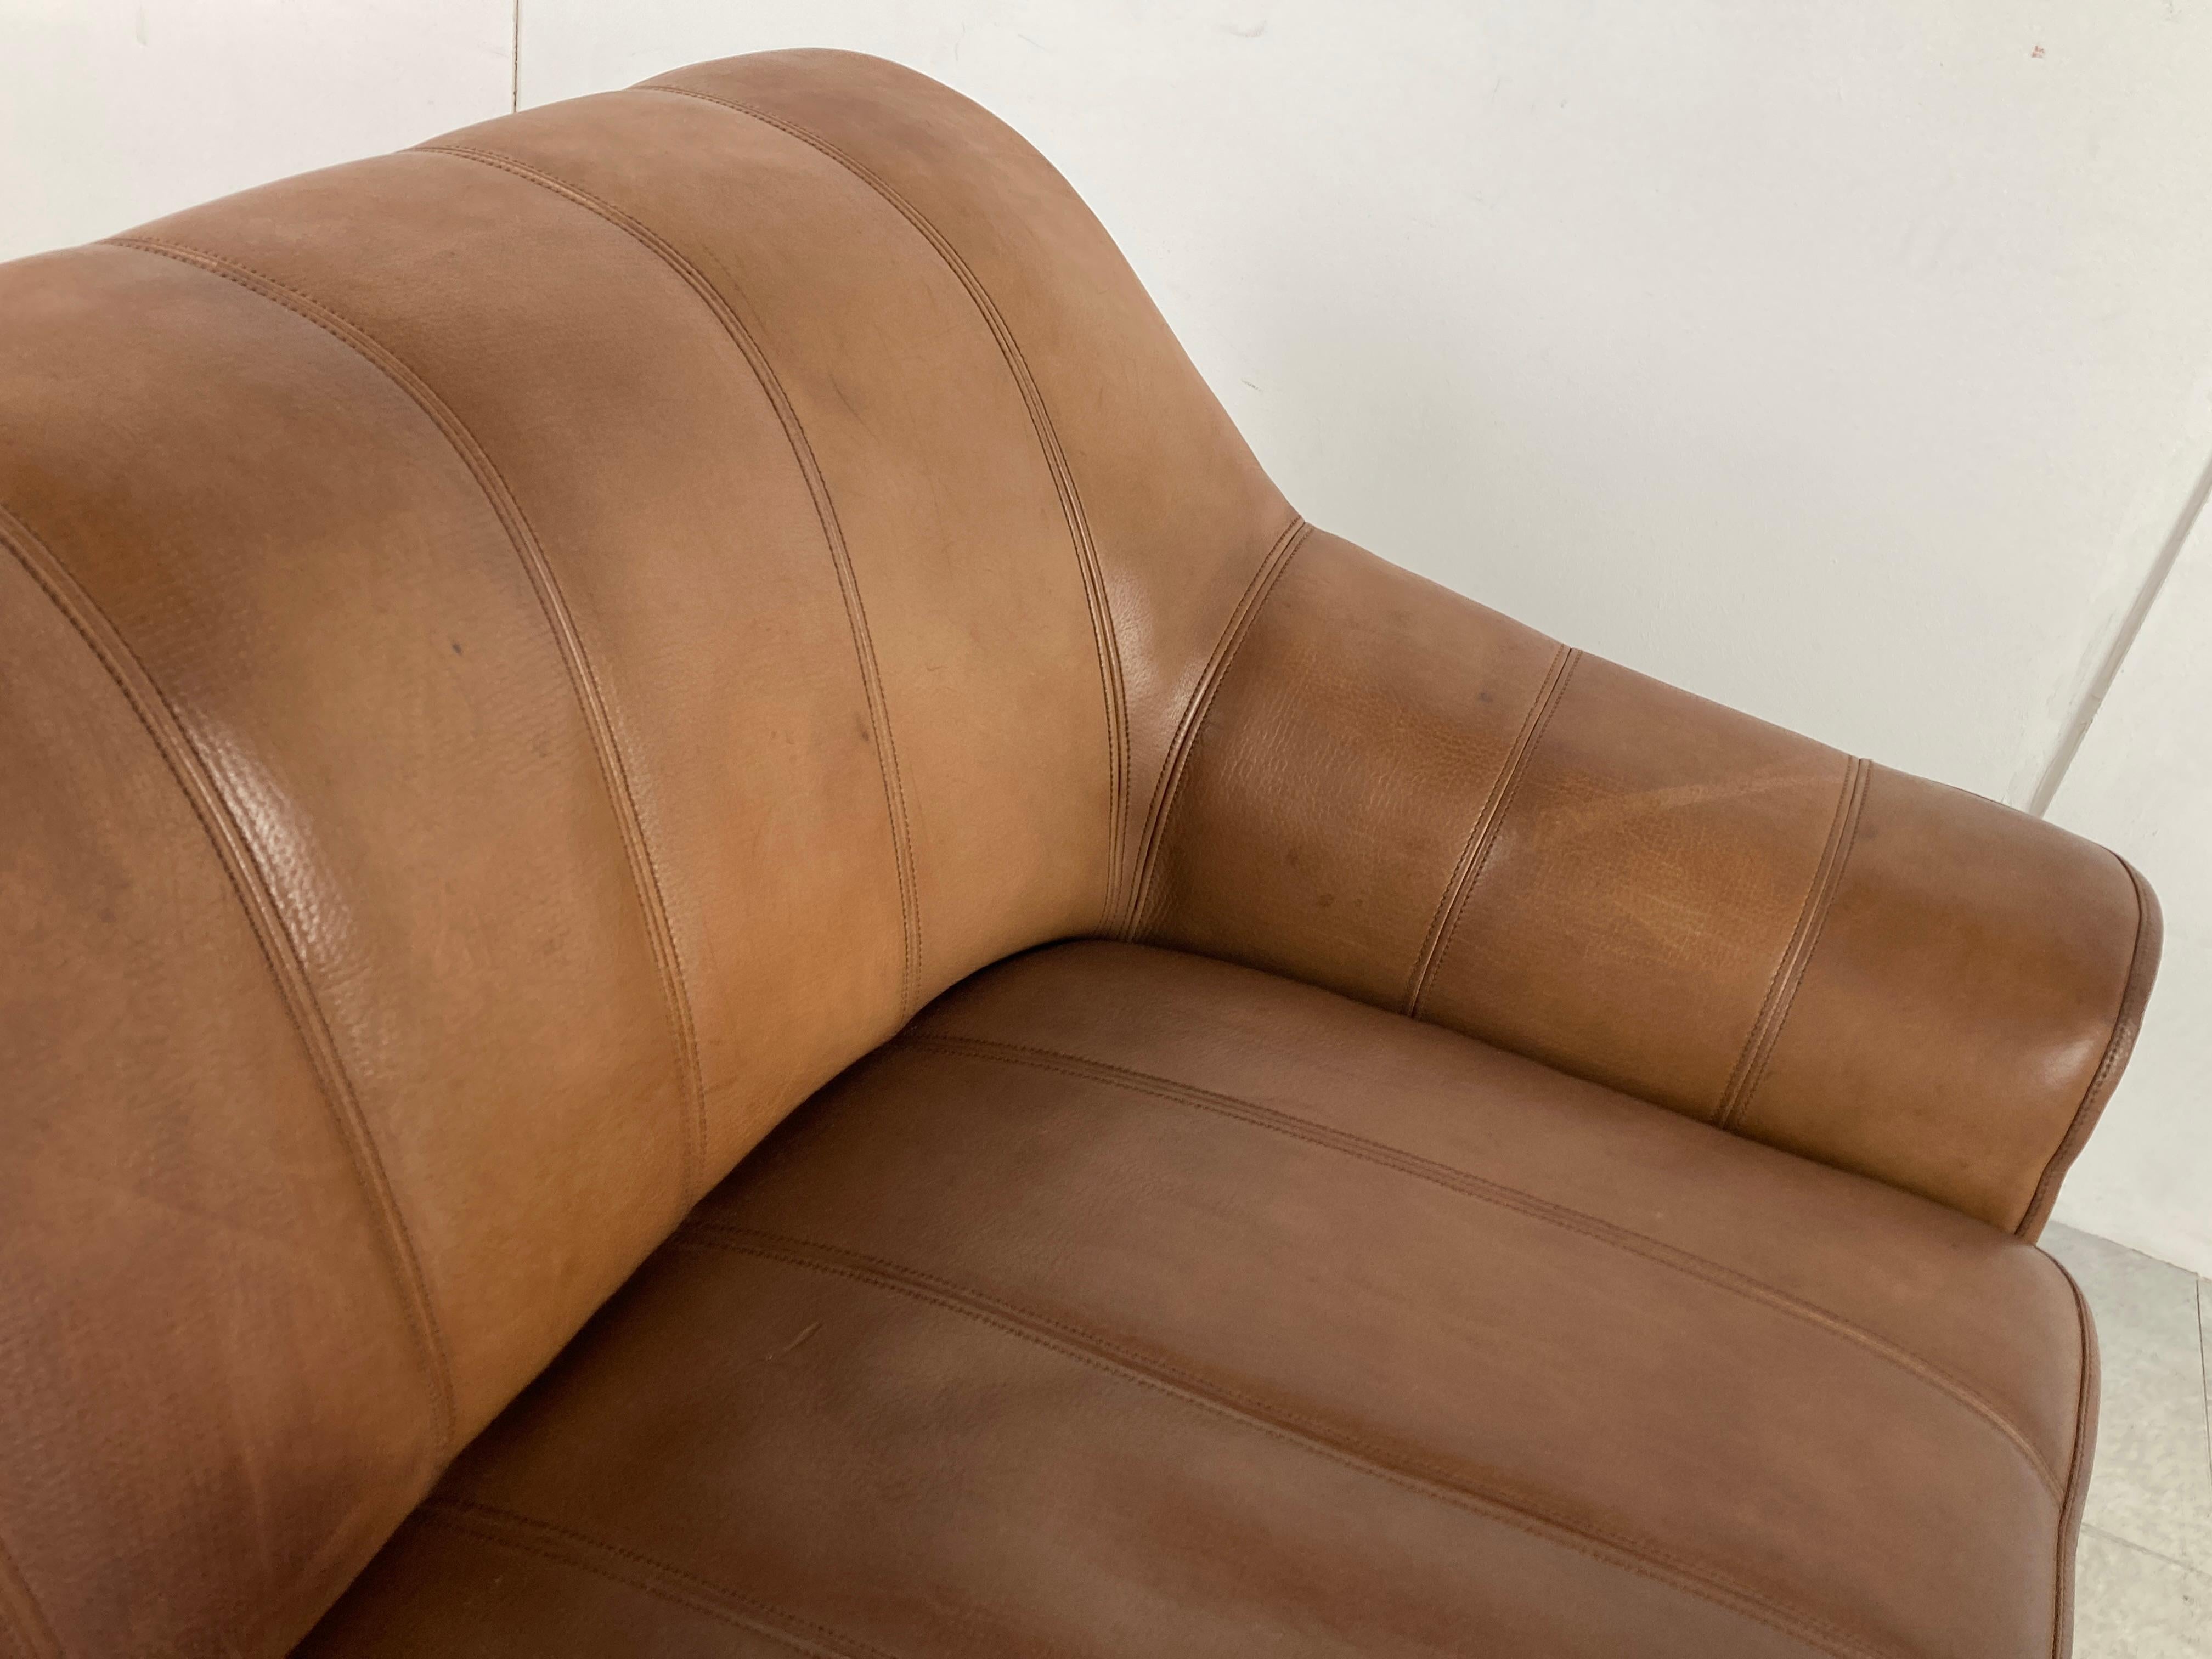 Gorgeous leather DS44 sofa from De Sede.

De Sede, renowned for using the best quality leather has created some wonderful sofas.

This one is no exception and is beautifully patinated troughout the years giving int some great charm

Combined with